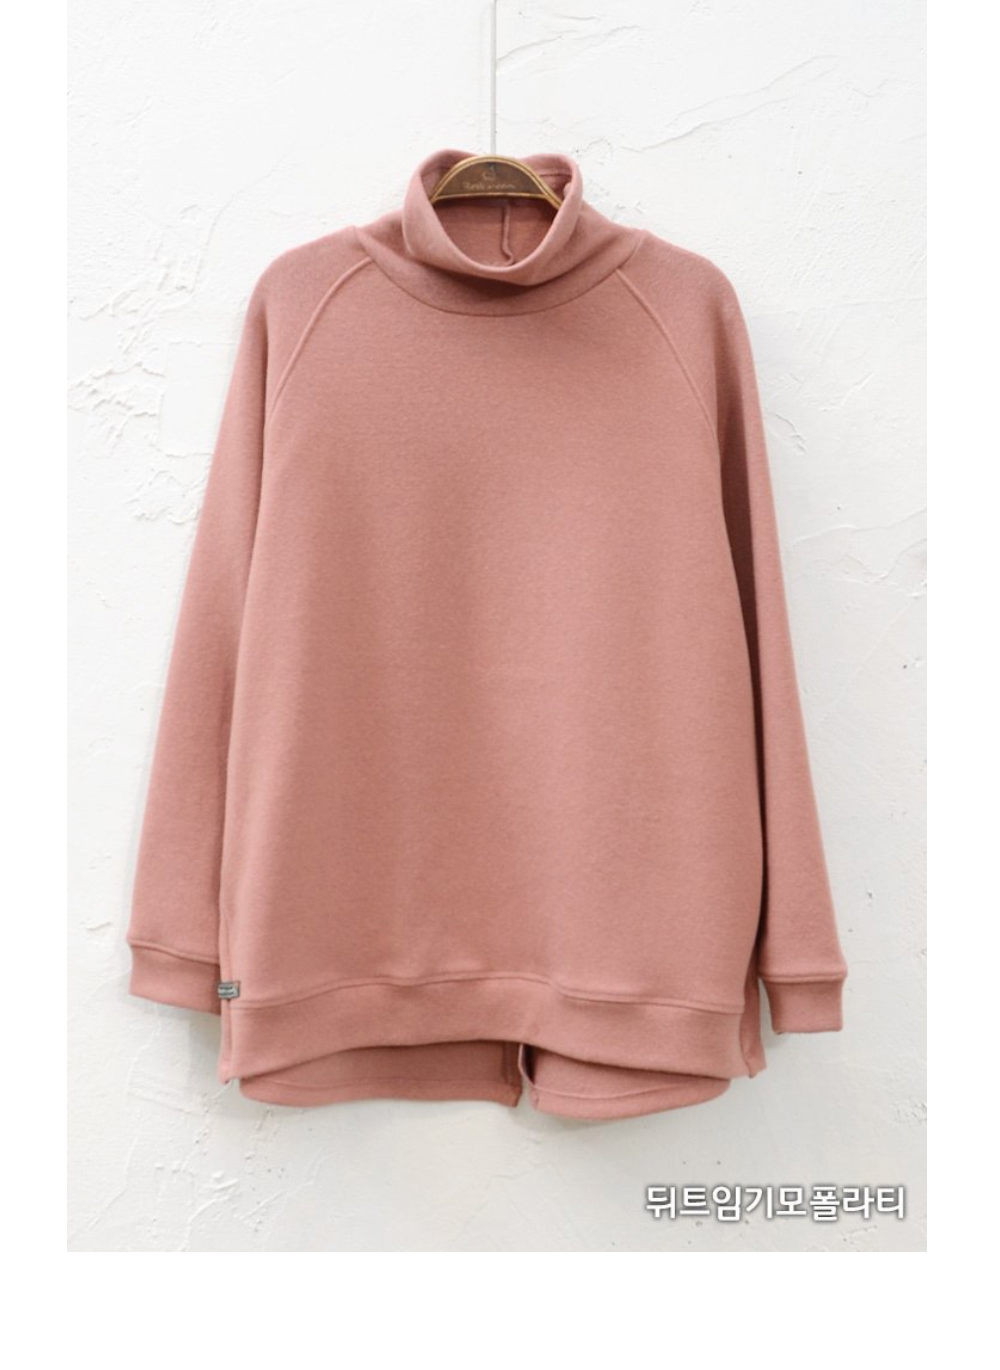 long sleeved tee peach color image-S4L7